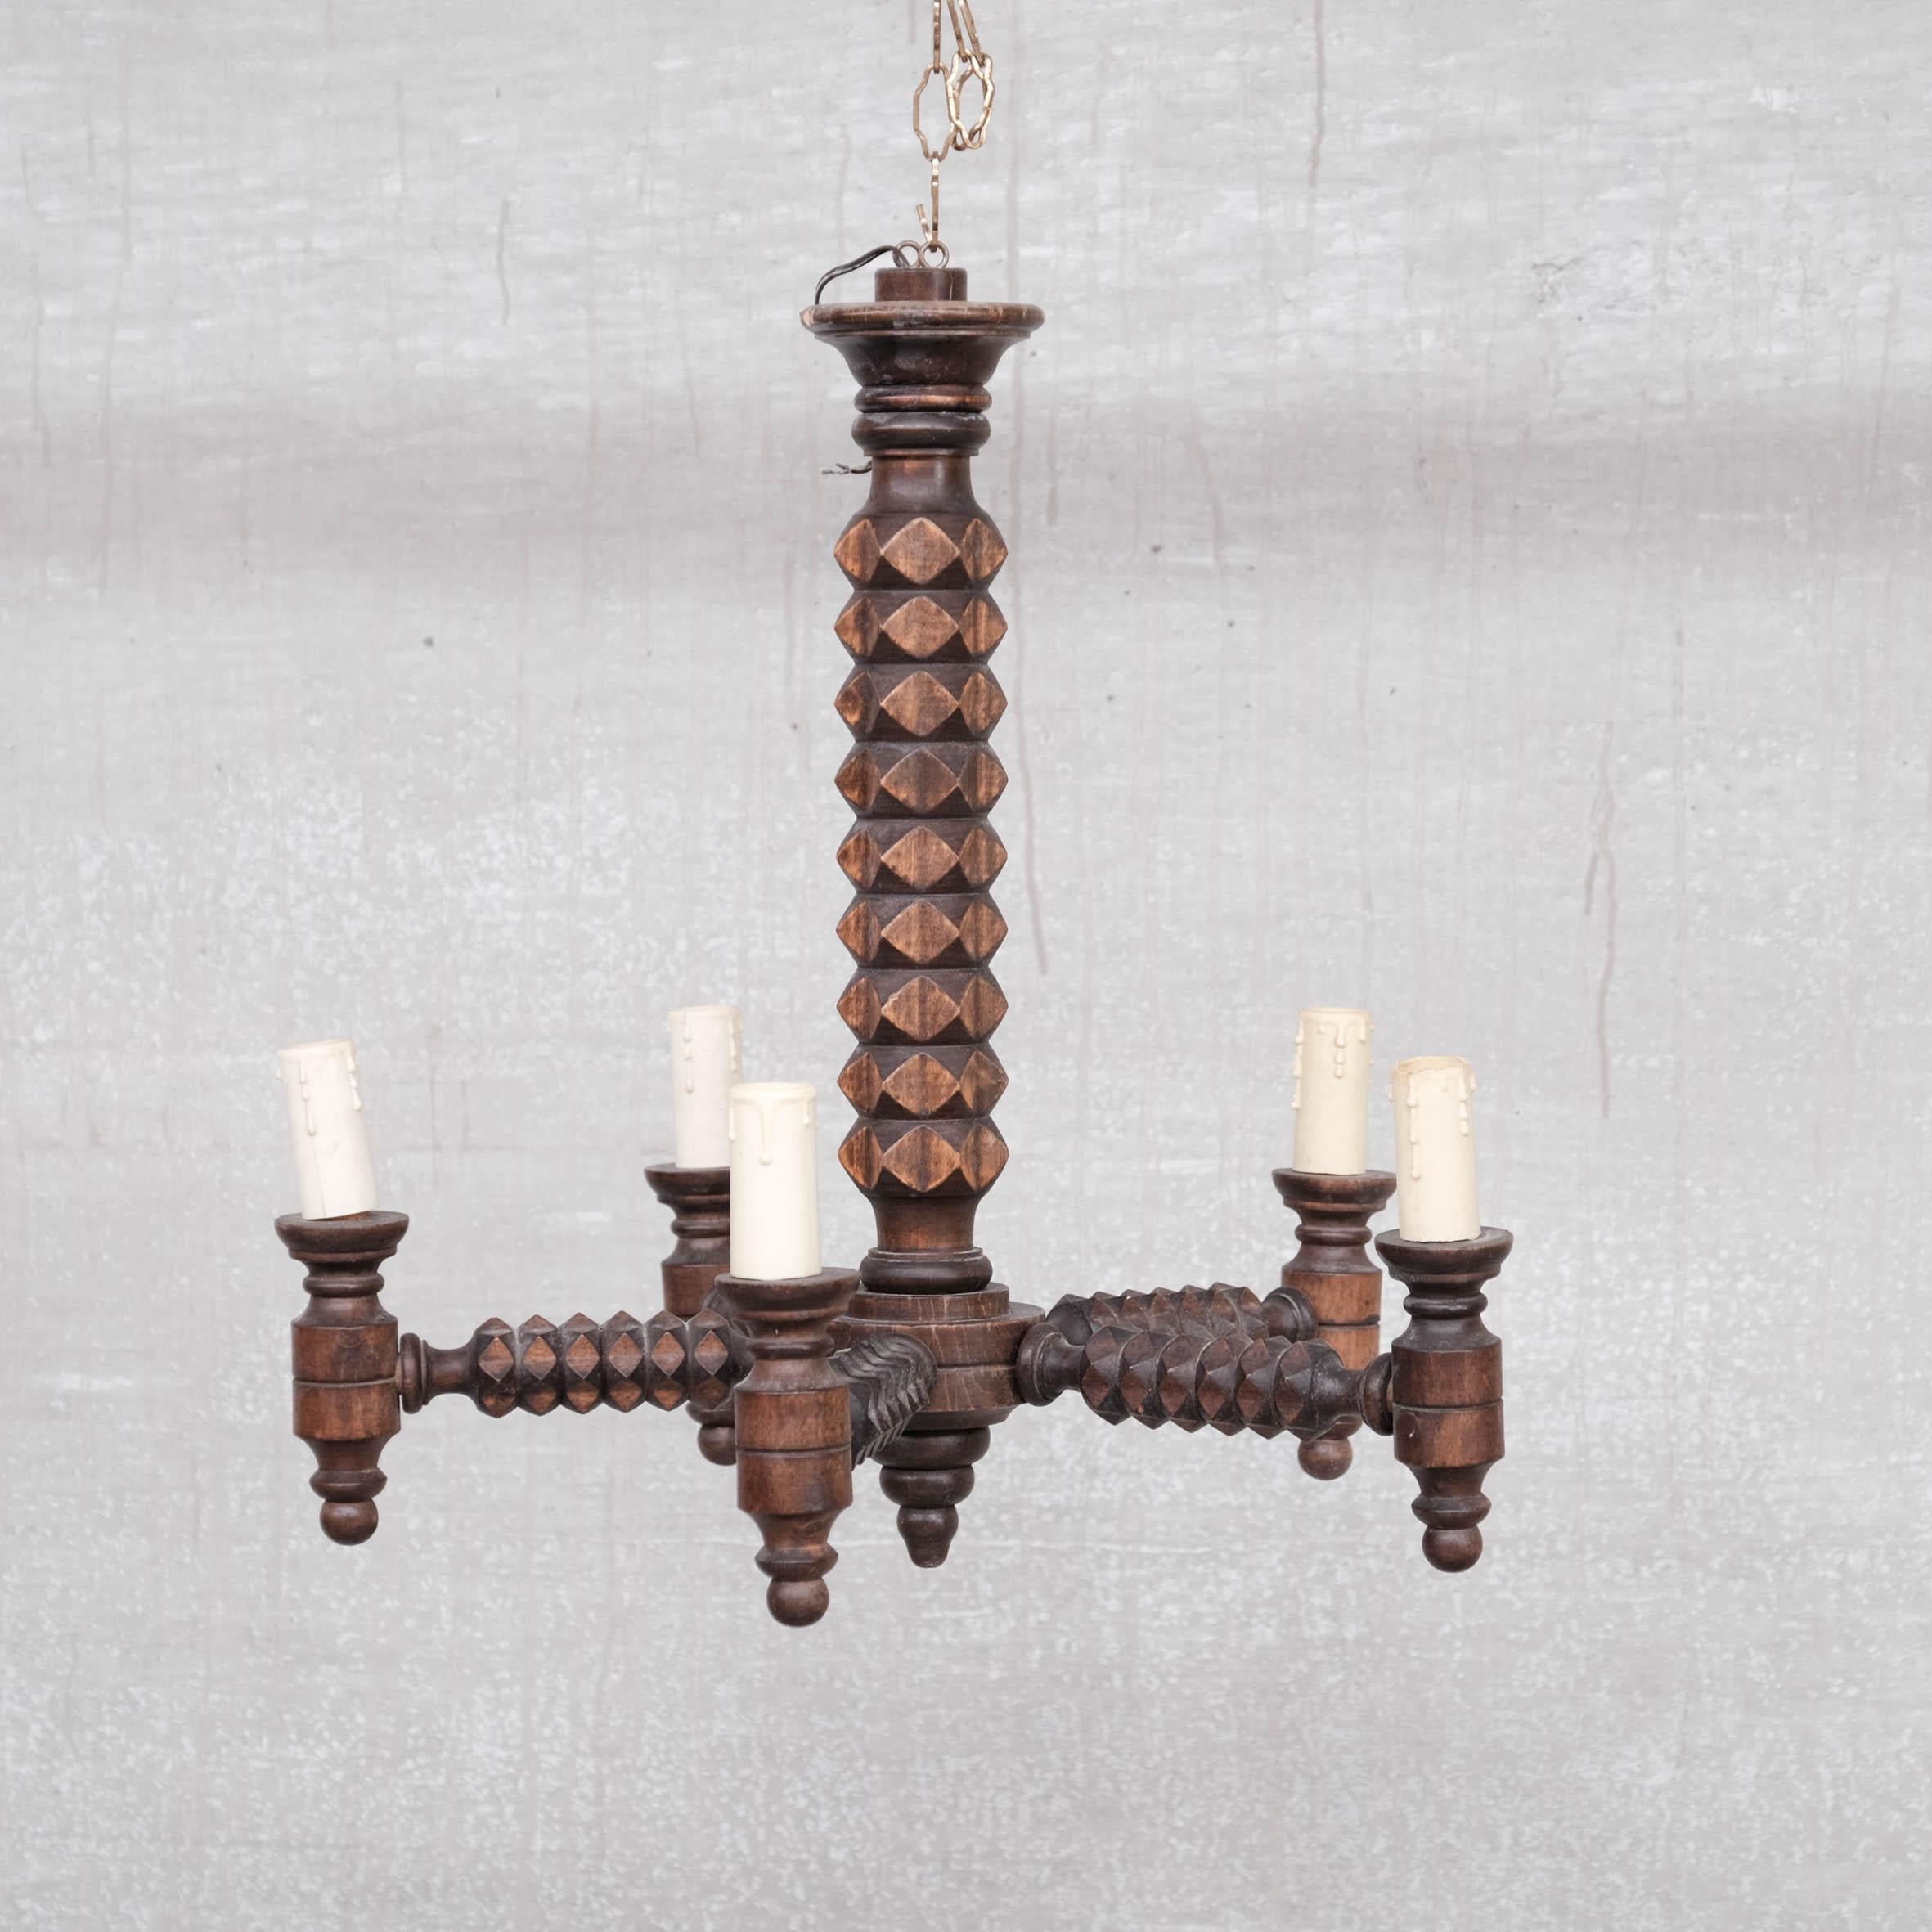 Wooden turned and carved oak chandeliers. 

France, c1930s. 

In the style of Dudouyt. 

Priced and sold individually.

Two available at the time of listing. 

Good vintage condition, some scuffs and wear commensurate with age.